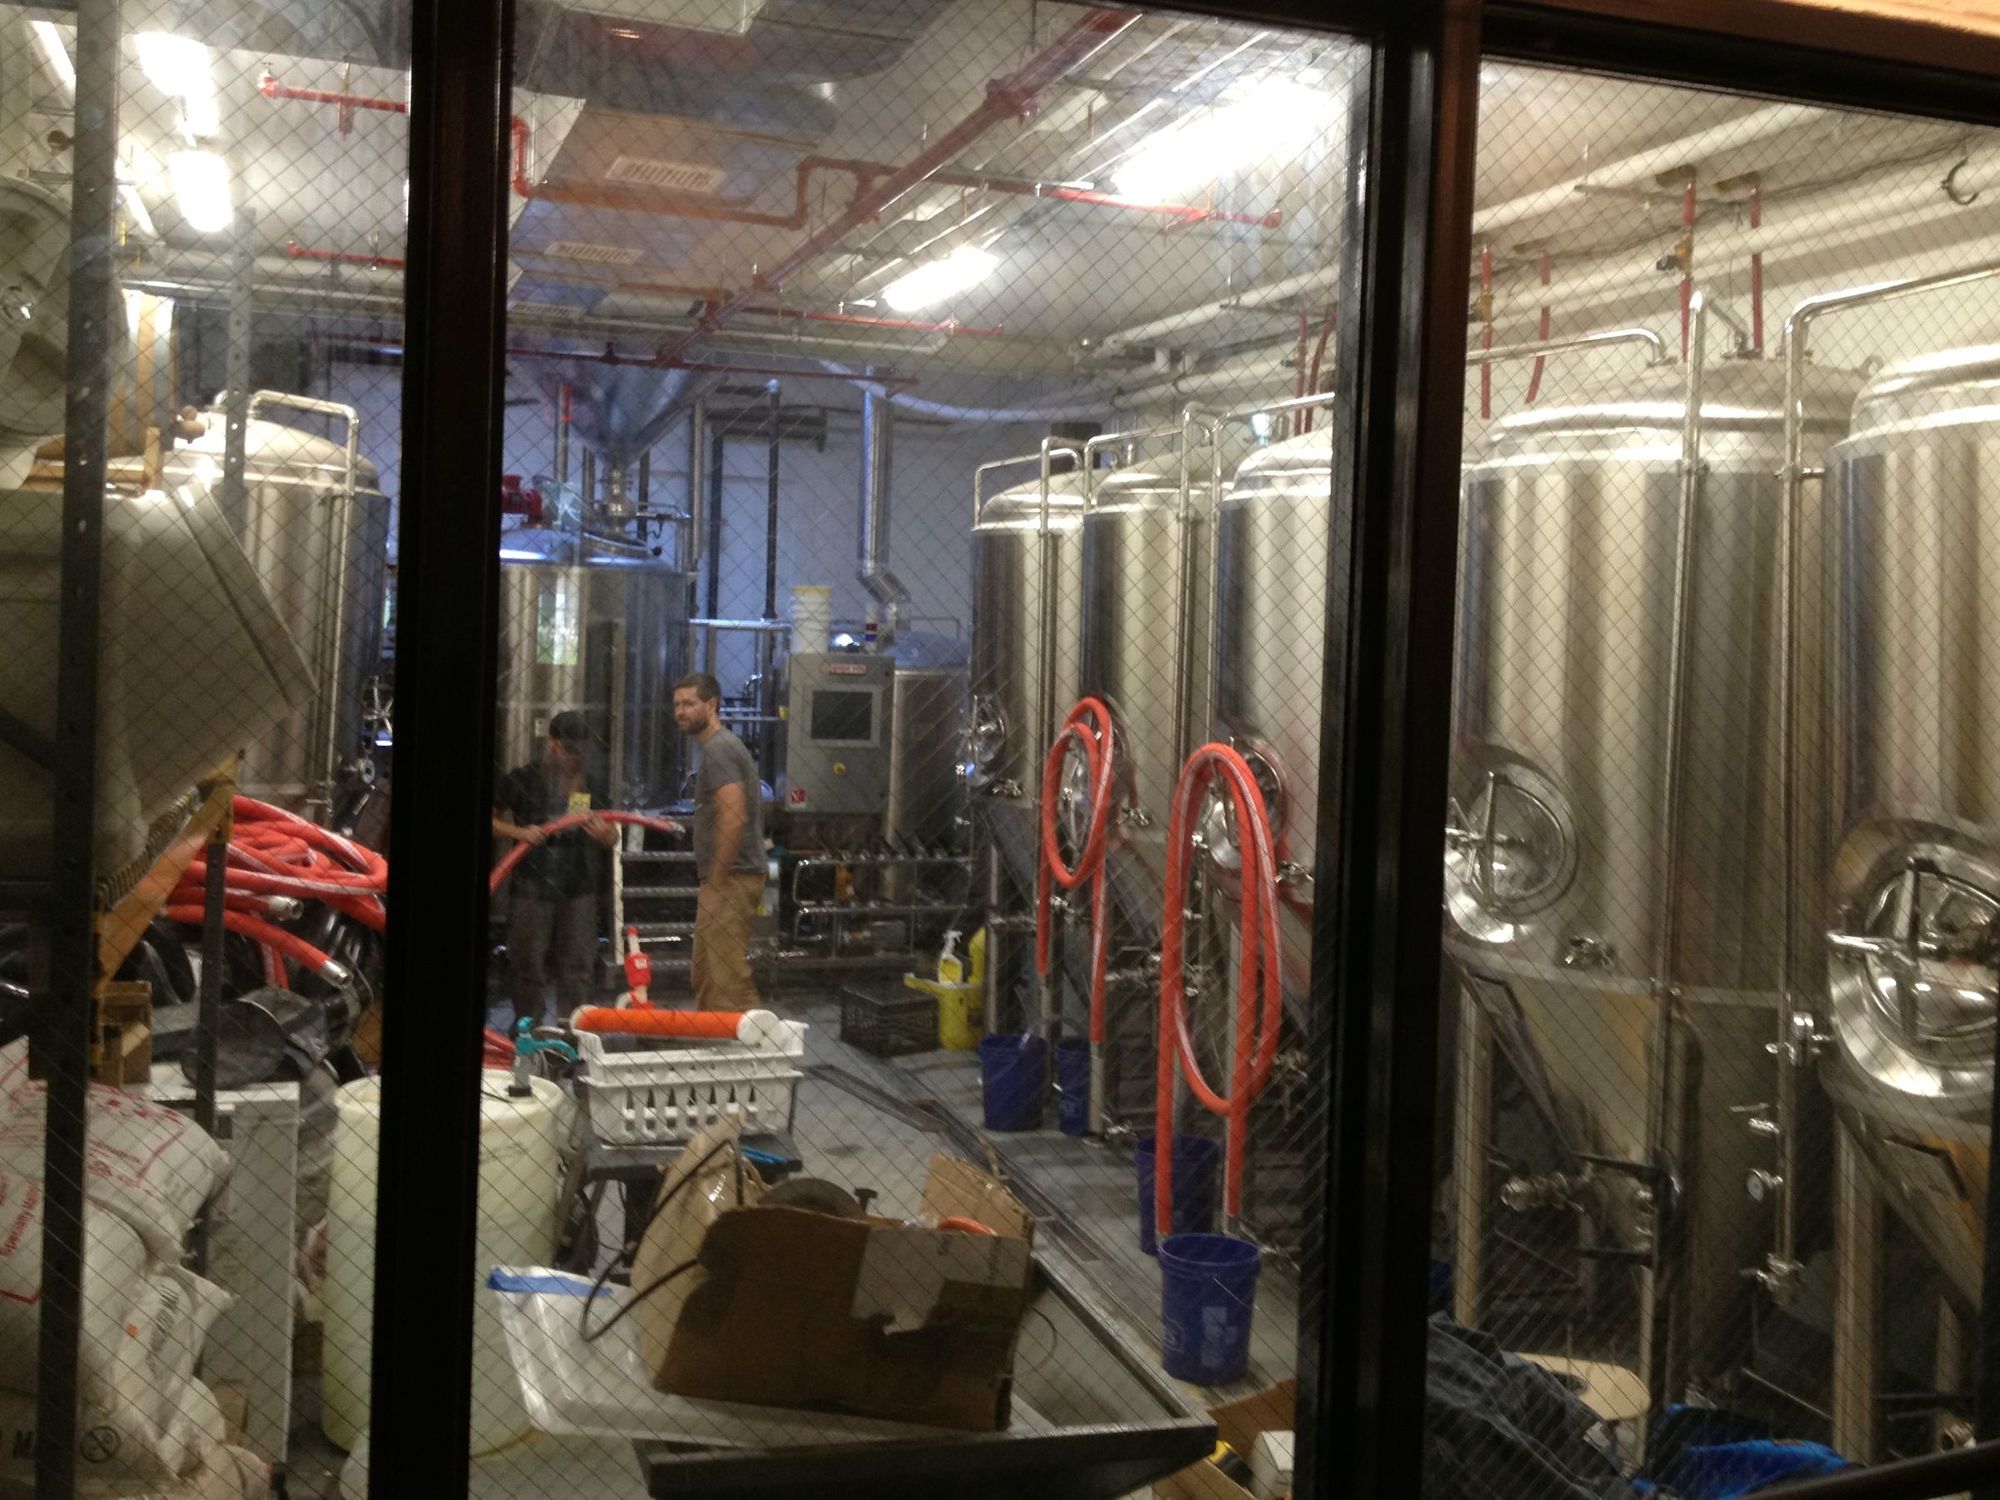 Threes Brewing Hosts Grand Opening On December 11